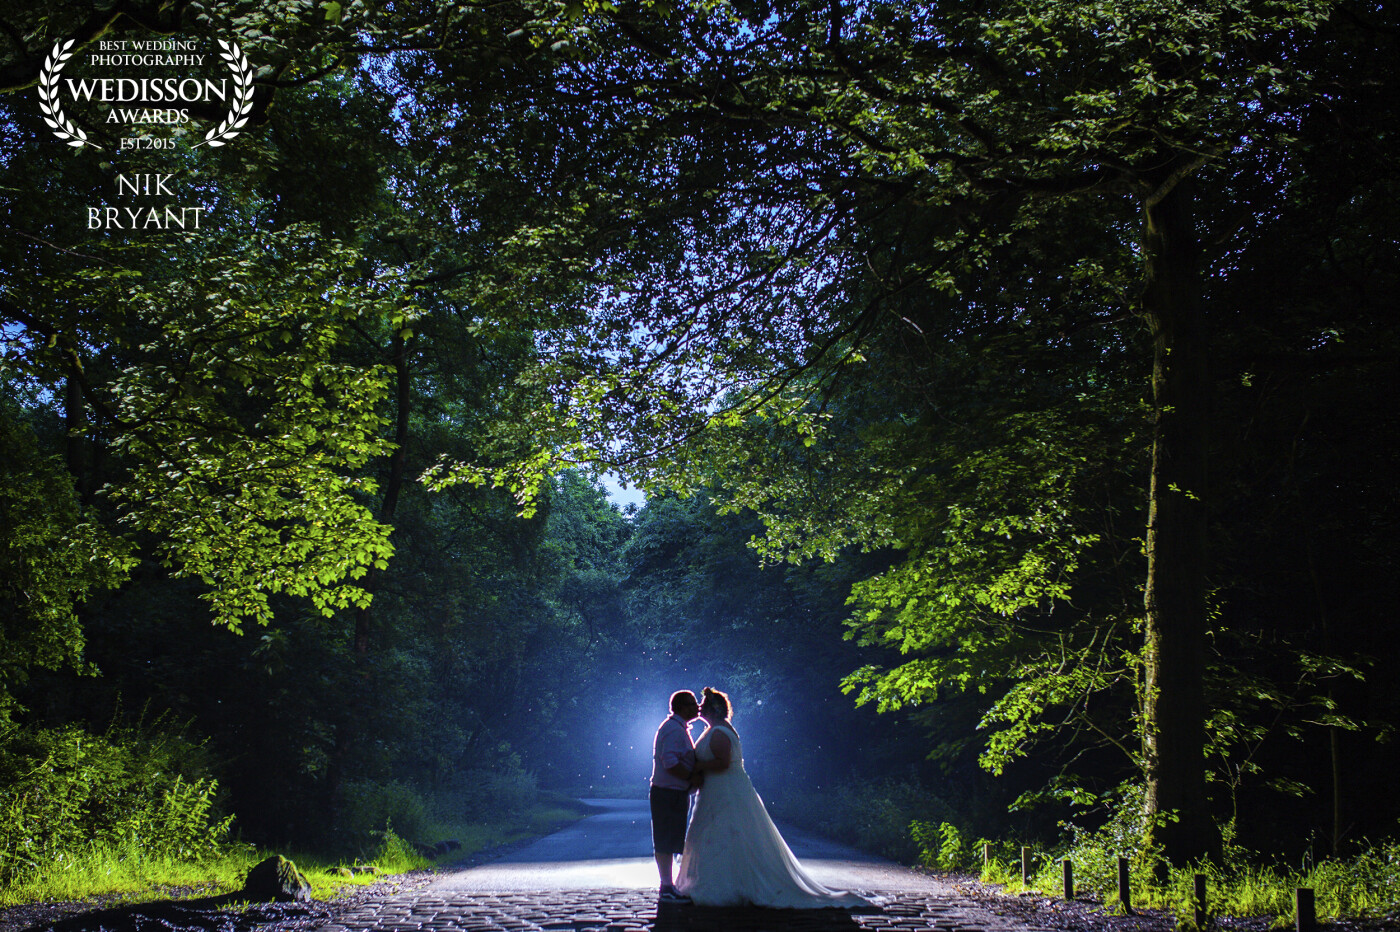 Taken late on the evening of the wedding the couple wanted a little time to themselves before the first dance so we went out to create this image. Just something simple yet colourful and slightly magical.<br />
<br />
One of my favourites from last year without a doubt!